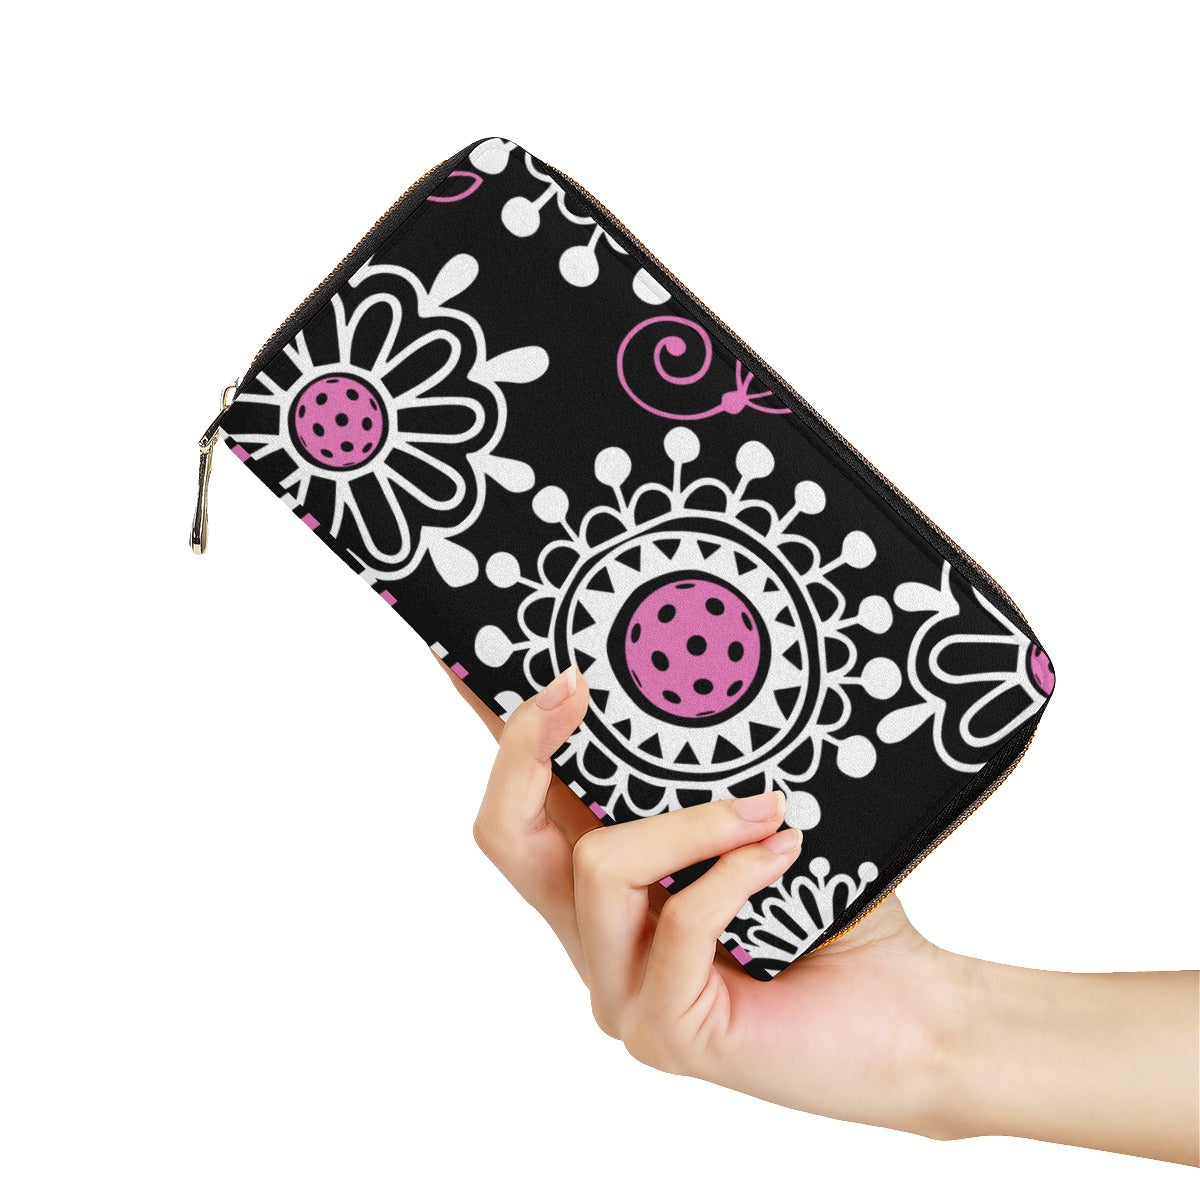 Coming Up Daisies - Black/Pink - Pickleball Mini Purse by Dizzy Pickle